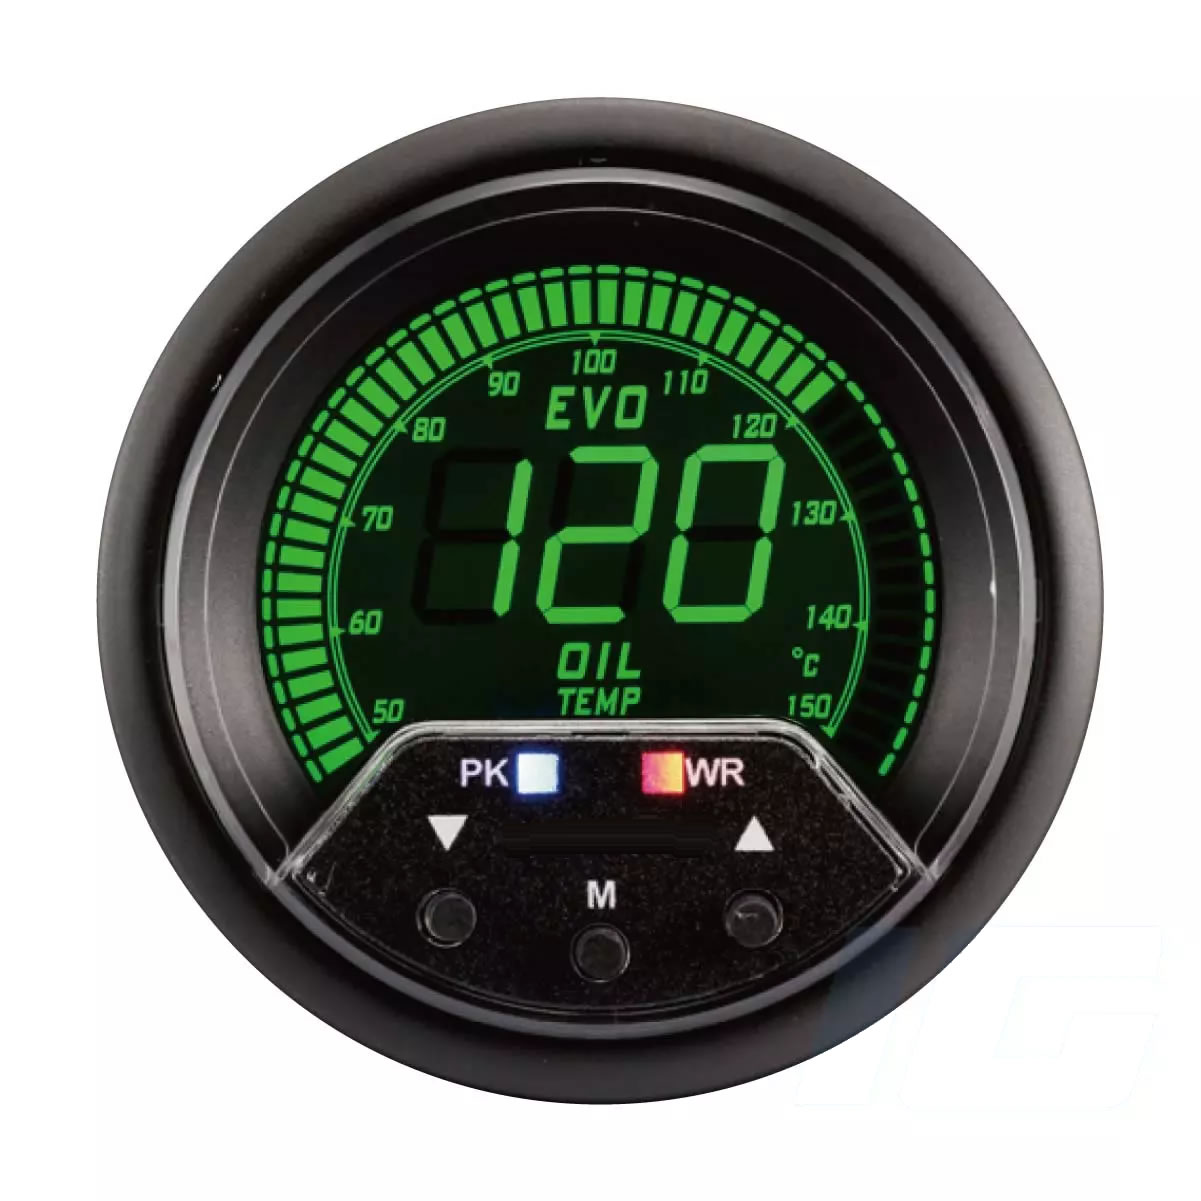 60mm LCD Performance Car Gauges - Oil Temp Gauge With Sensor and Warning and Peak For Your Sport Racing Car